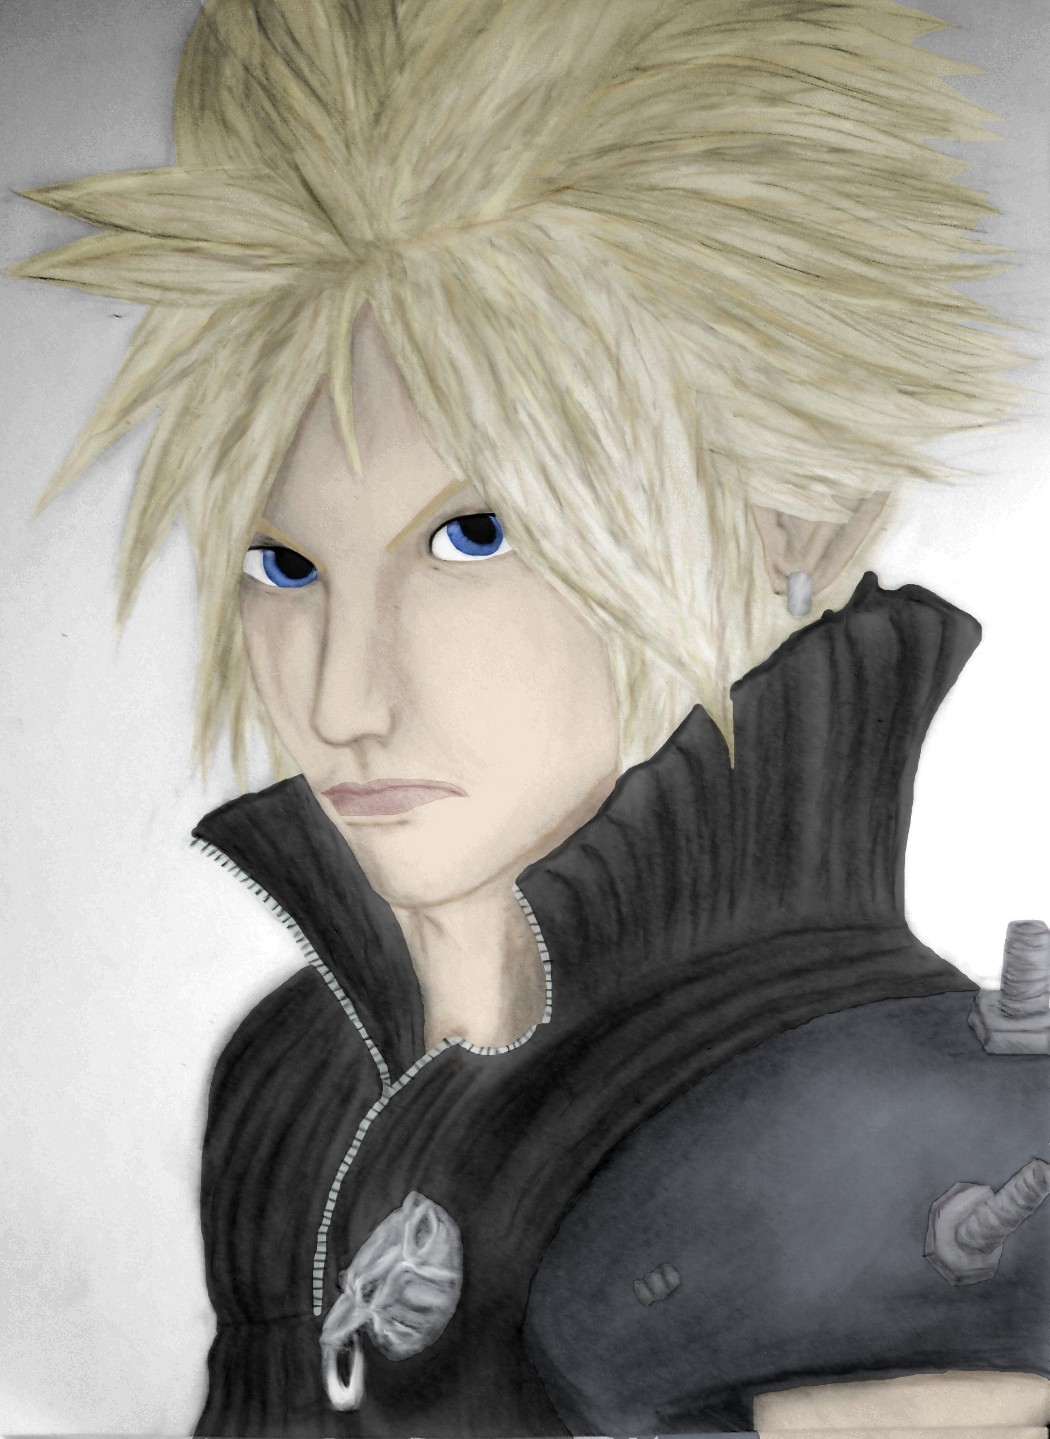 The Beast That is Cloud Strife by BGSGLGW1